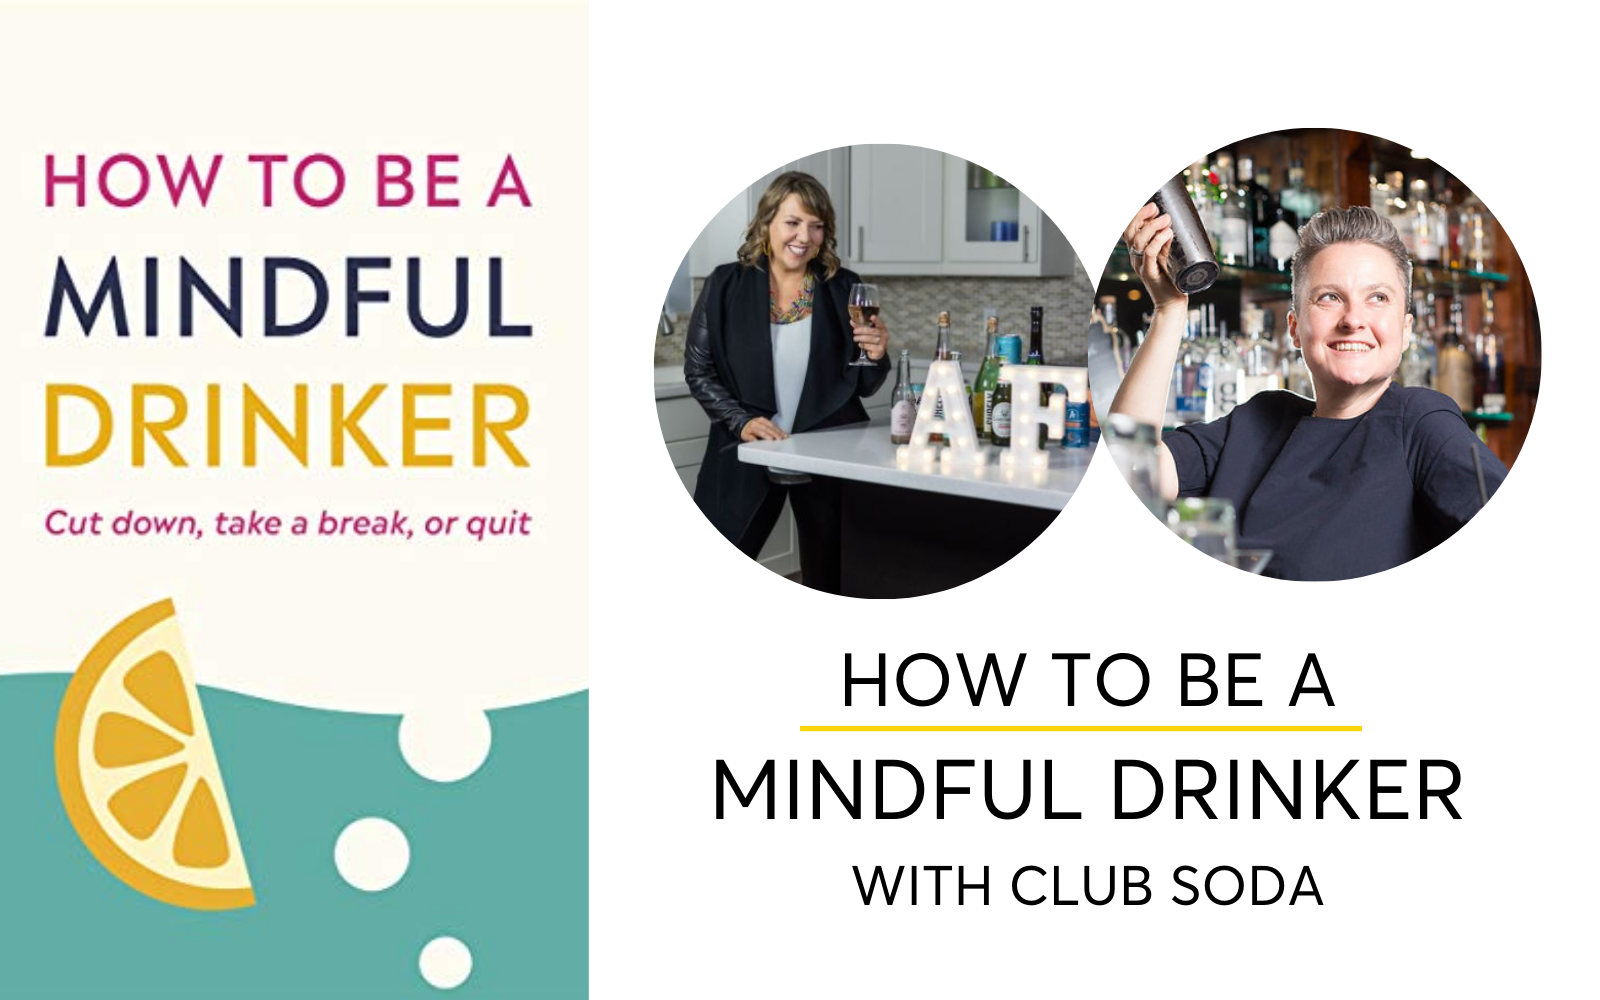 How To Be A Mindful Drinker